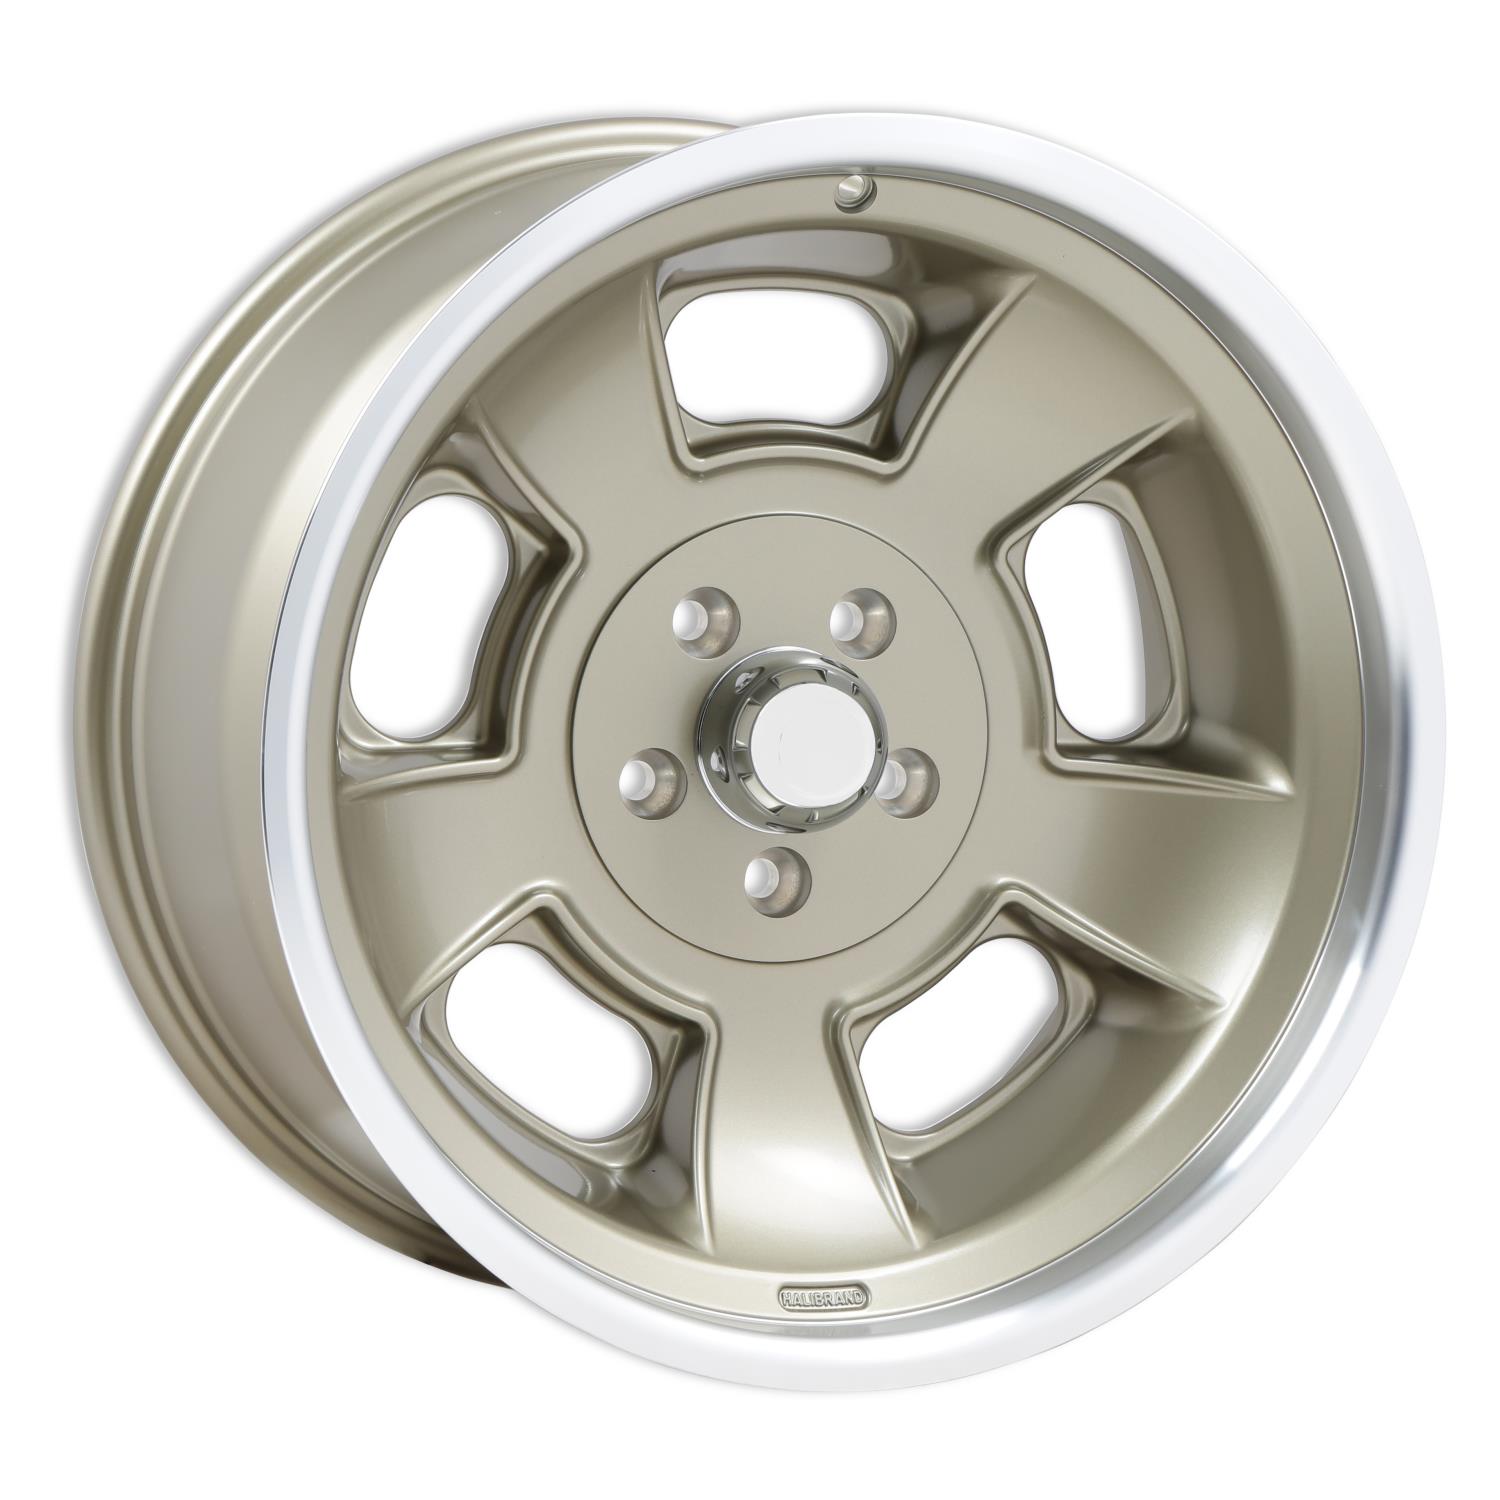 Sprint Rear Wheel, Size: 20x10", Bolt Pattern: 5x5", Backspace: 5.5" [MAG7 with Machined Lip - Semi Gloss Clearcoat]